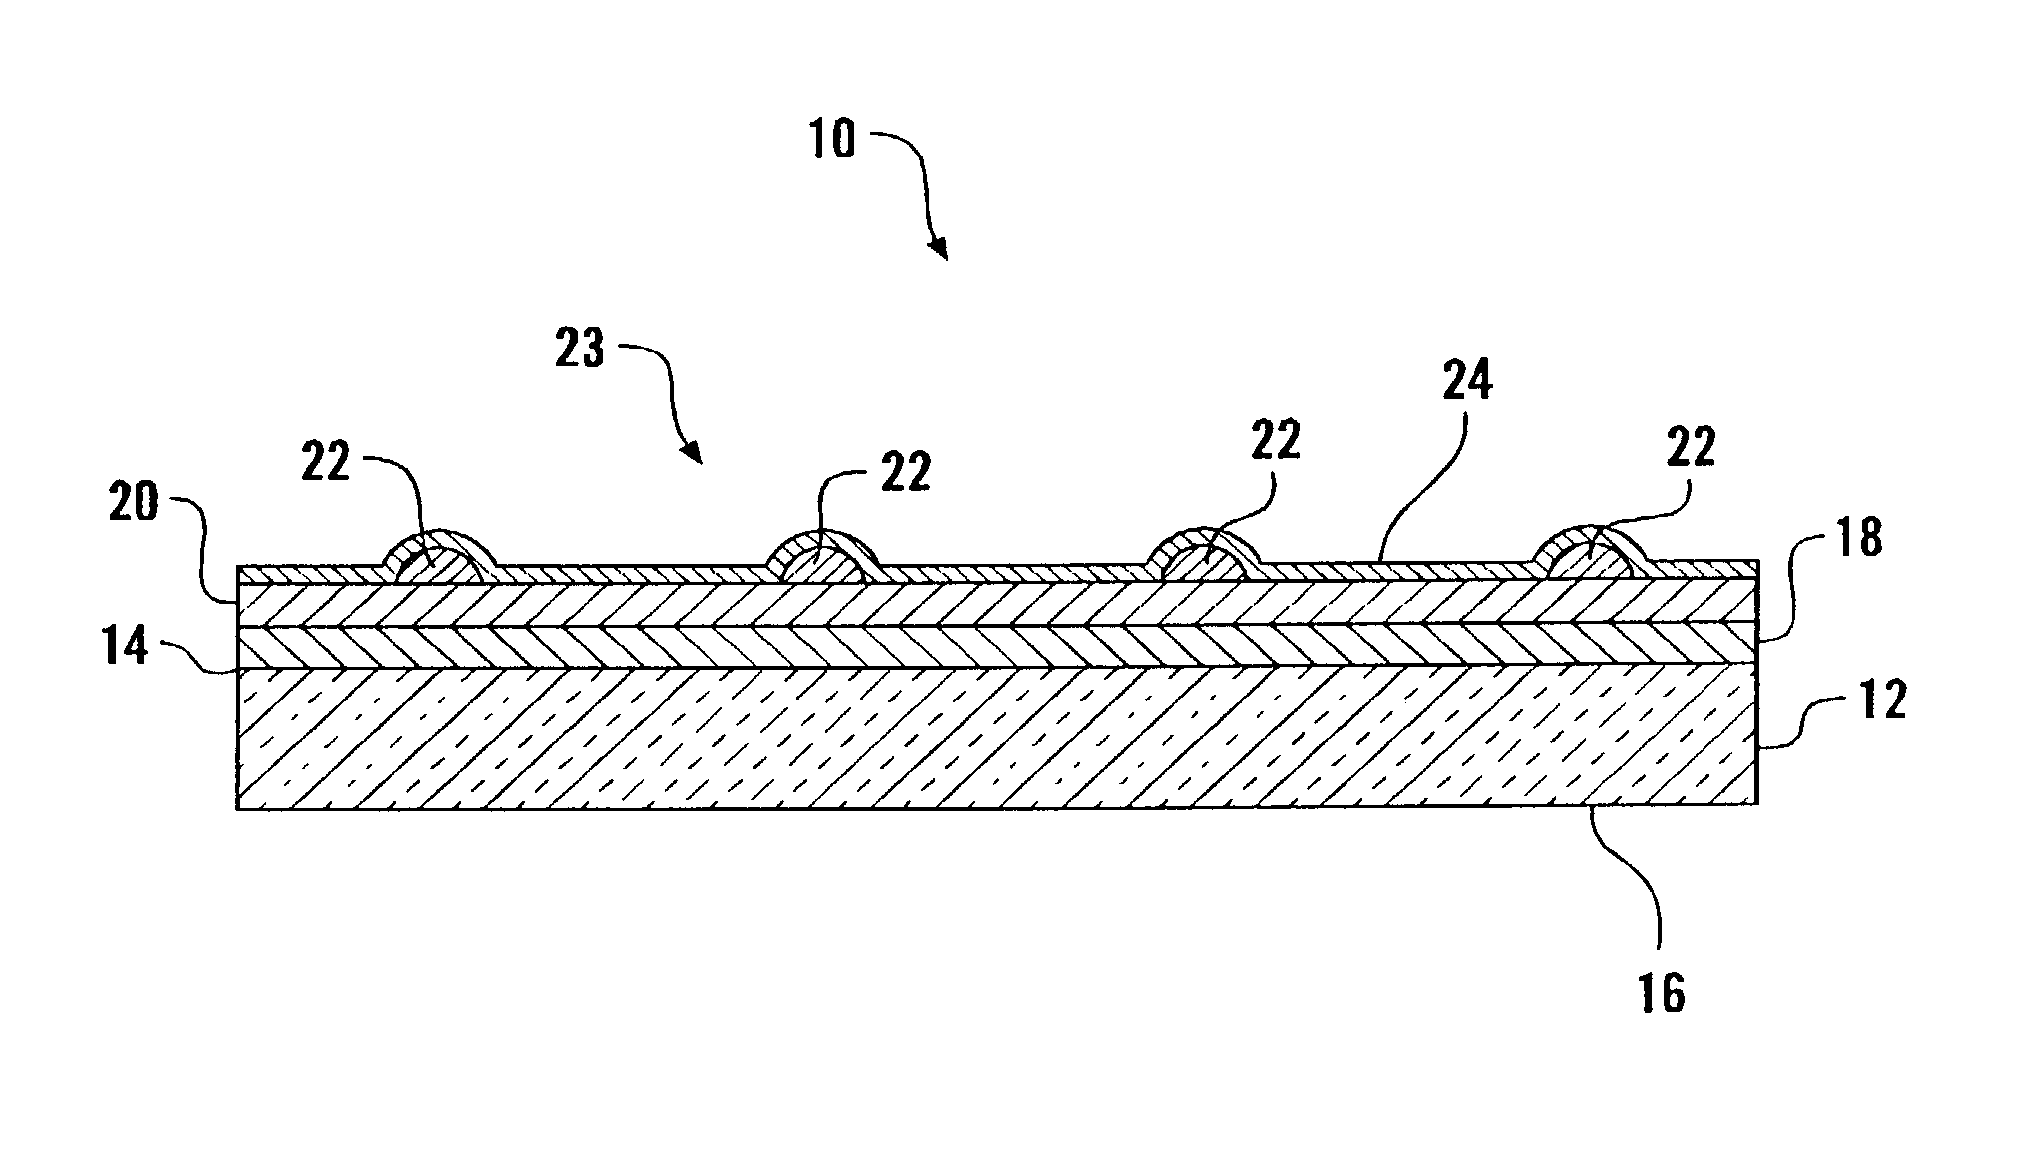 Glossy printed article and method of manufacturing same